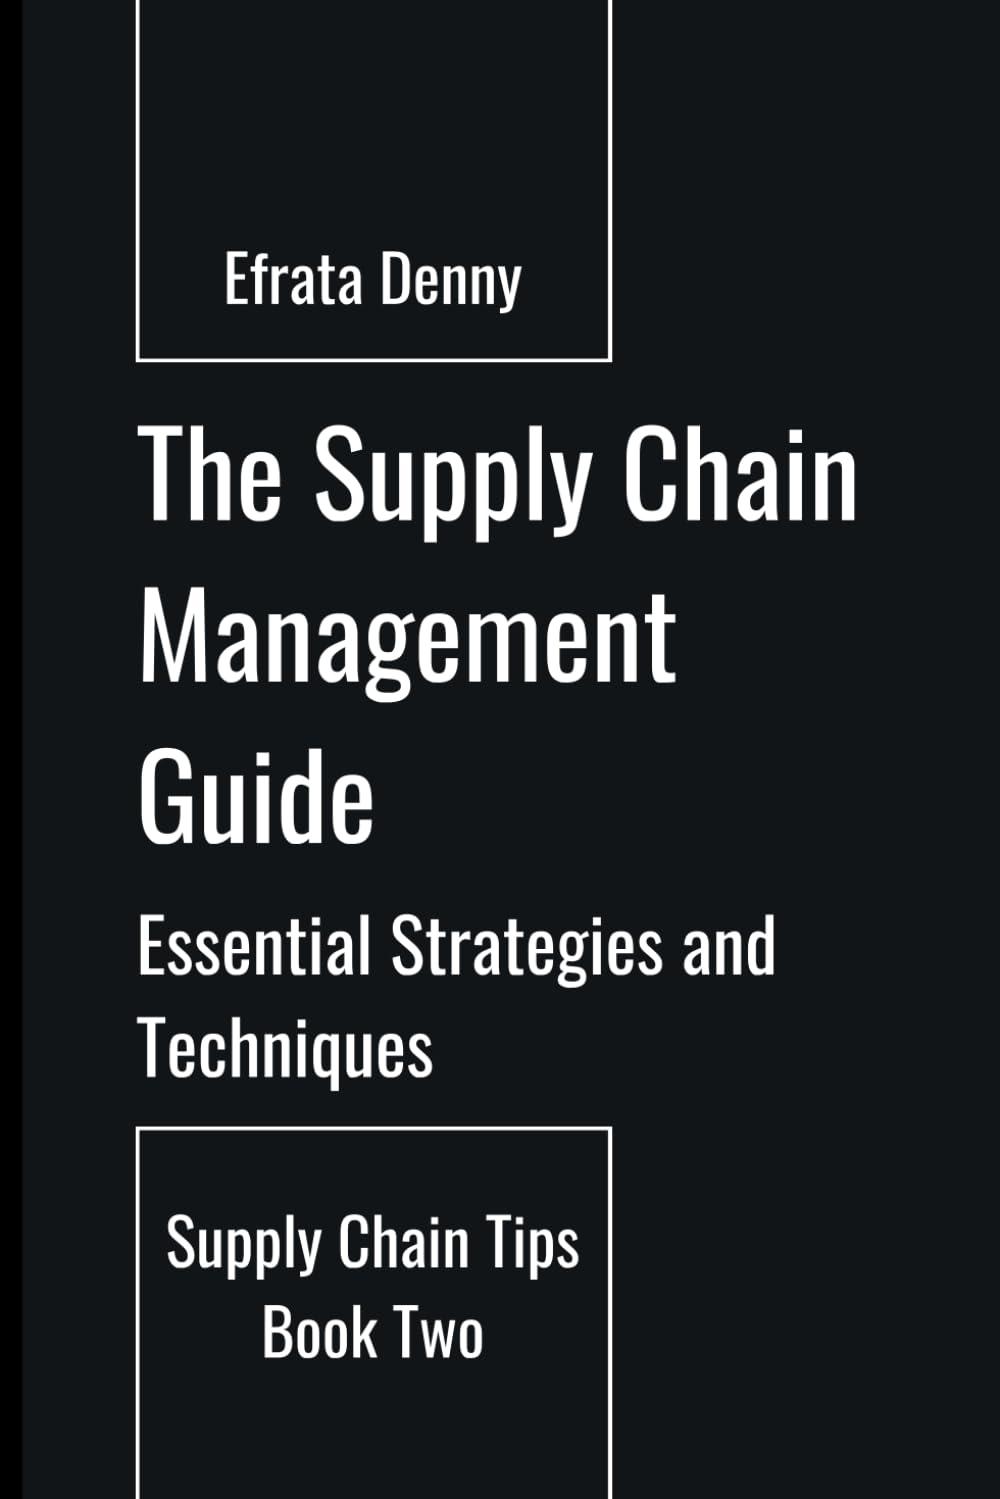 the supply chain management guide essential strategies and techniques 1st edition efrata denny saputra yunus